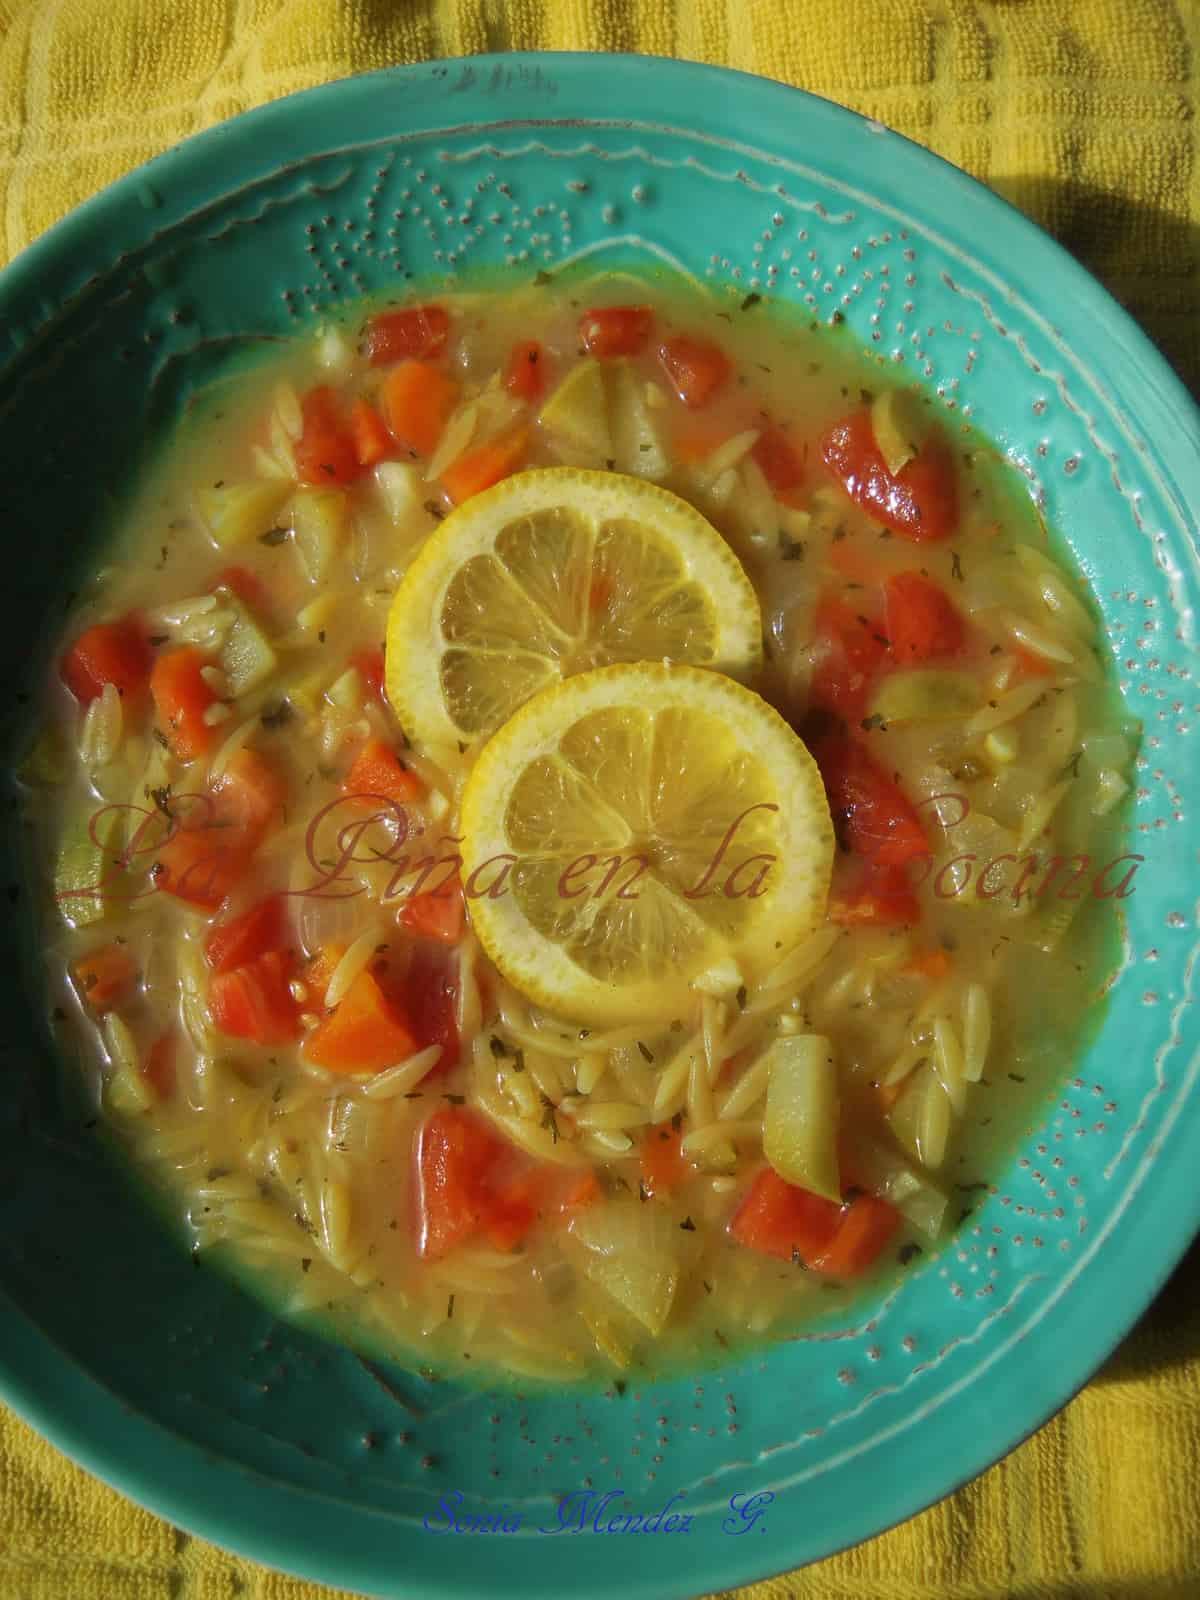 Sopa de Orzo y Limon~ Orzo Pasta with Tomato, Carrots, Onions, Garlic and Herbs in a Tangy Lemon/Chicken Broth